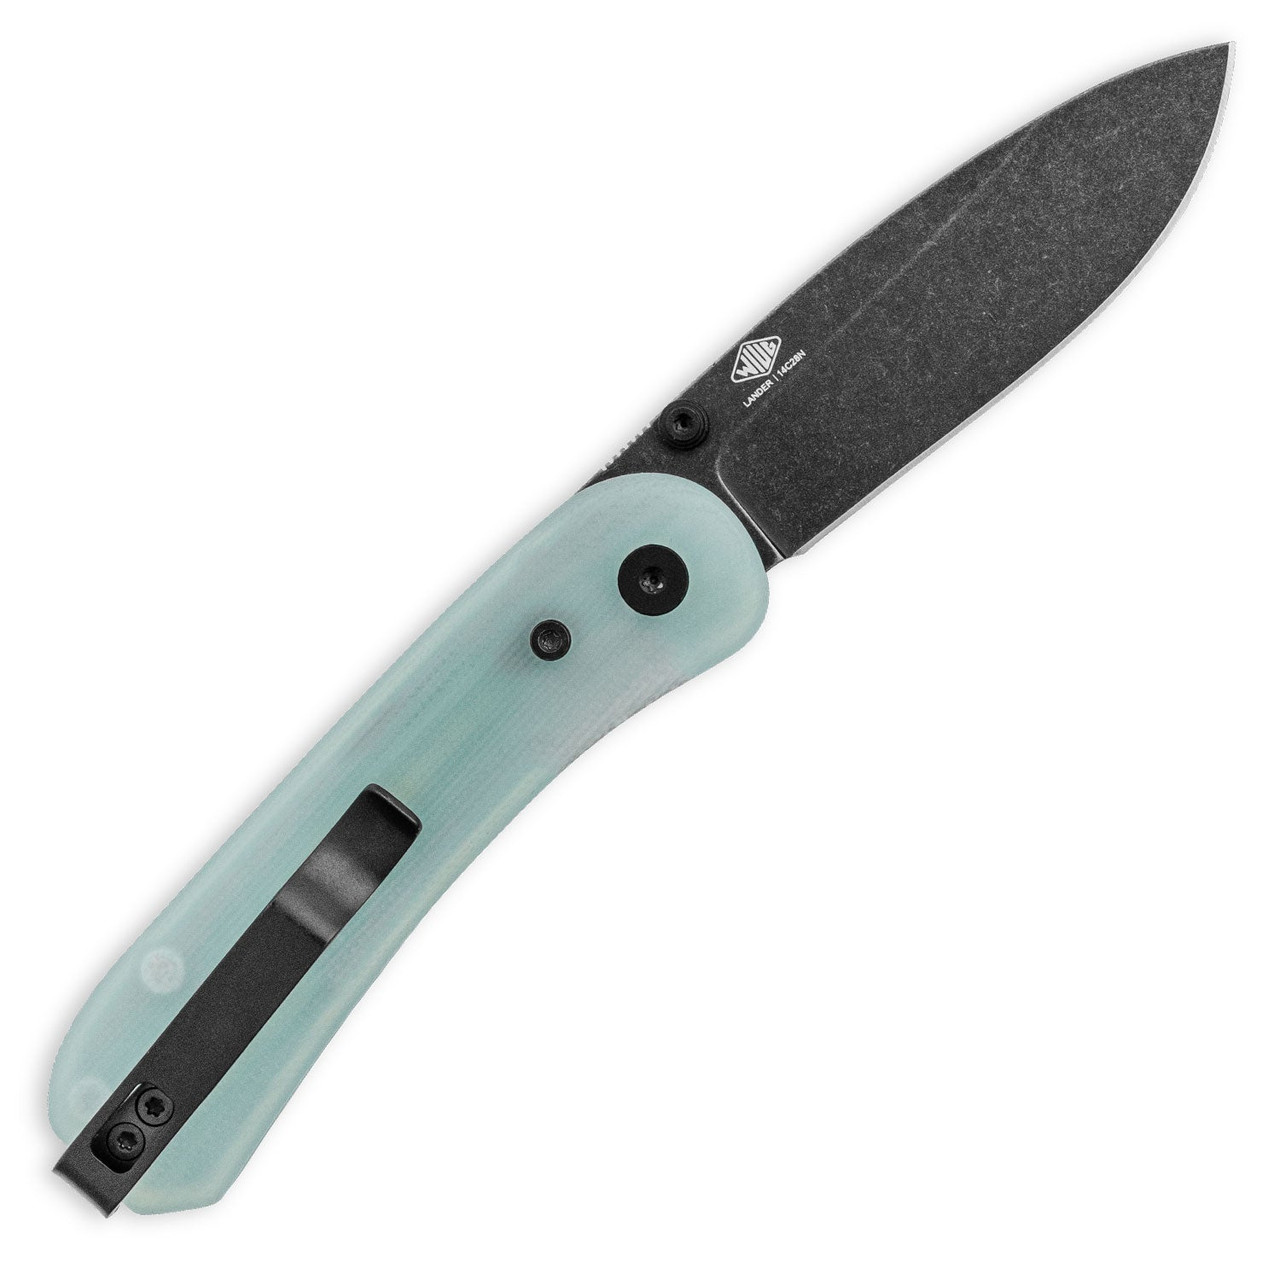 Knafs White G10 Lander Knife Replacement Scales For Sale